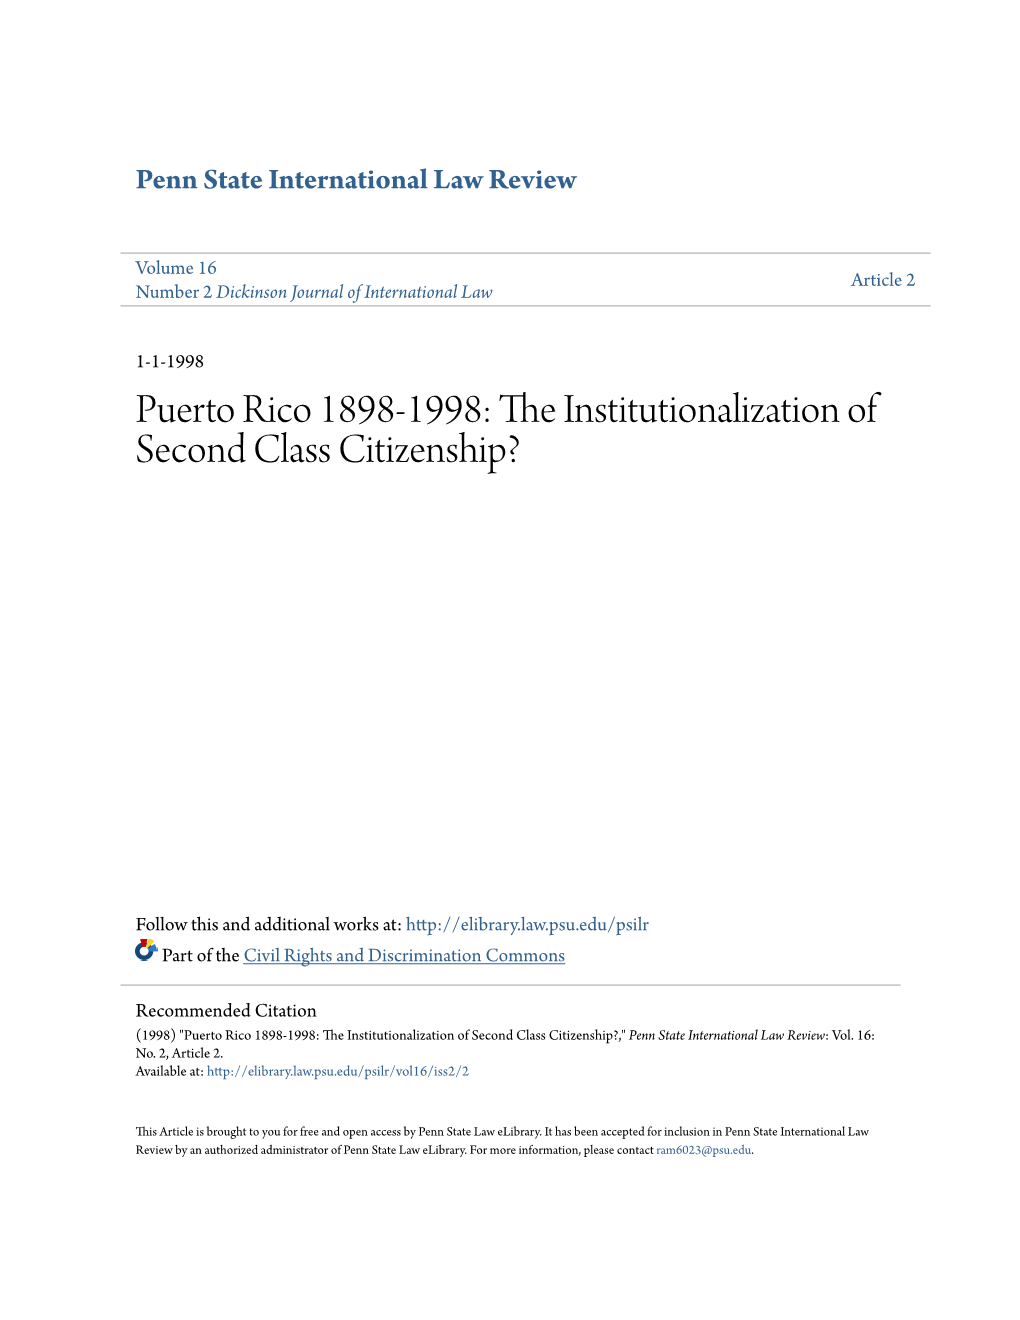 Puerto Rico 1898-1998: the Institutionalization of Second Class Citizenship?